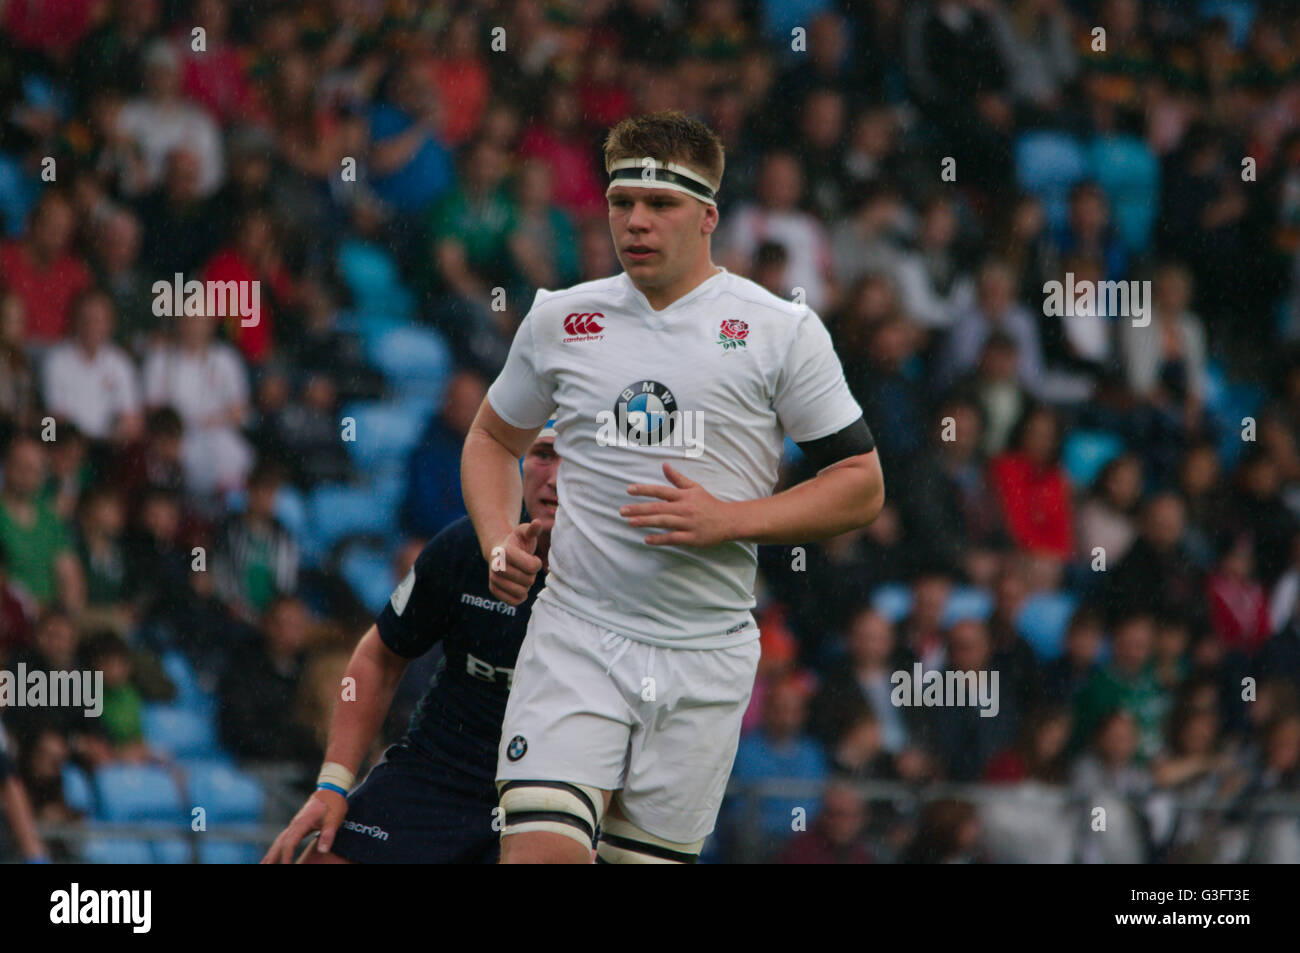 Manchester, UK, 11 June 2016, Callum Chick of England U20 playing against Scotland in the World Rugby U20 Championship 2016 at Manchester City Academy Stadium. Credit: Colin Edwards / Alamy Live News Stock Photo